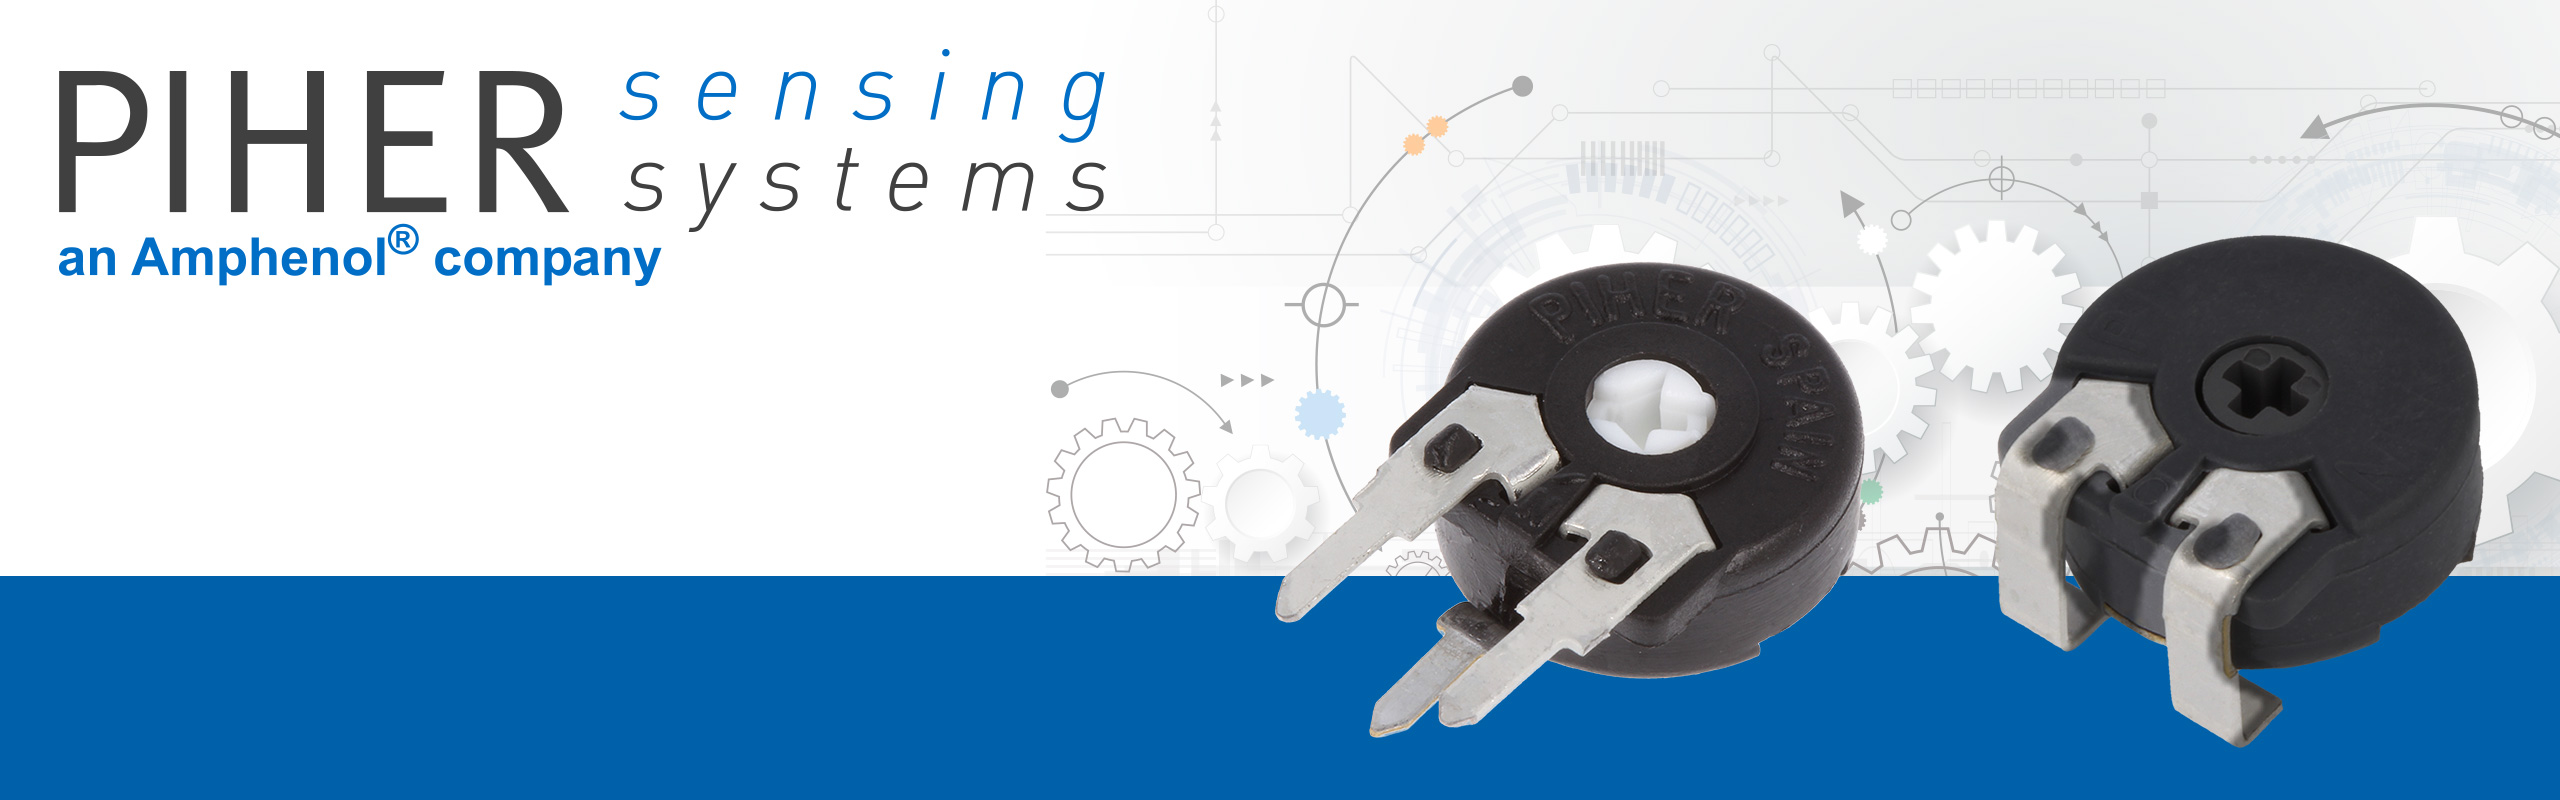 Piher Sensing Systems - Montagepotentiometers